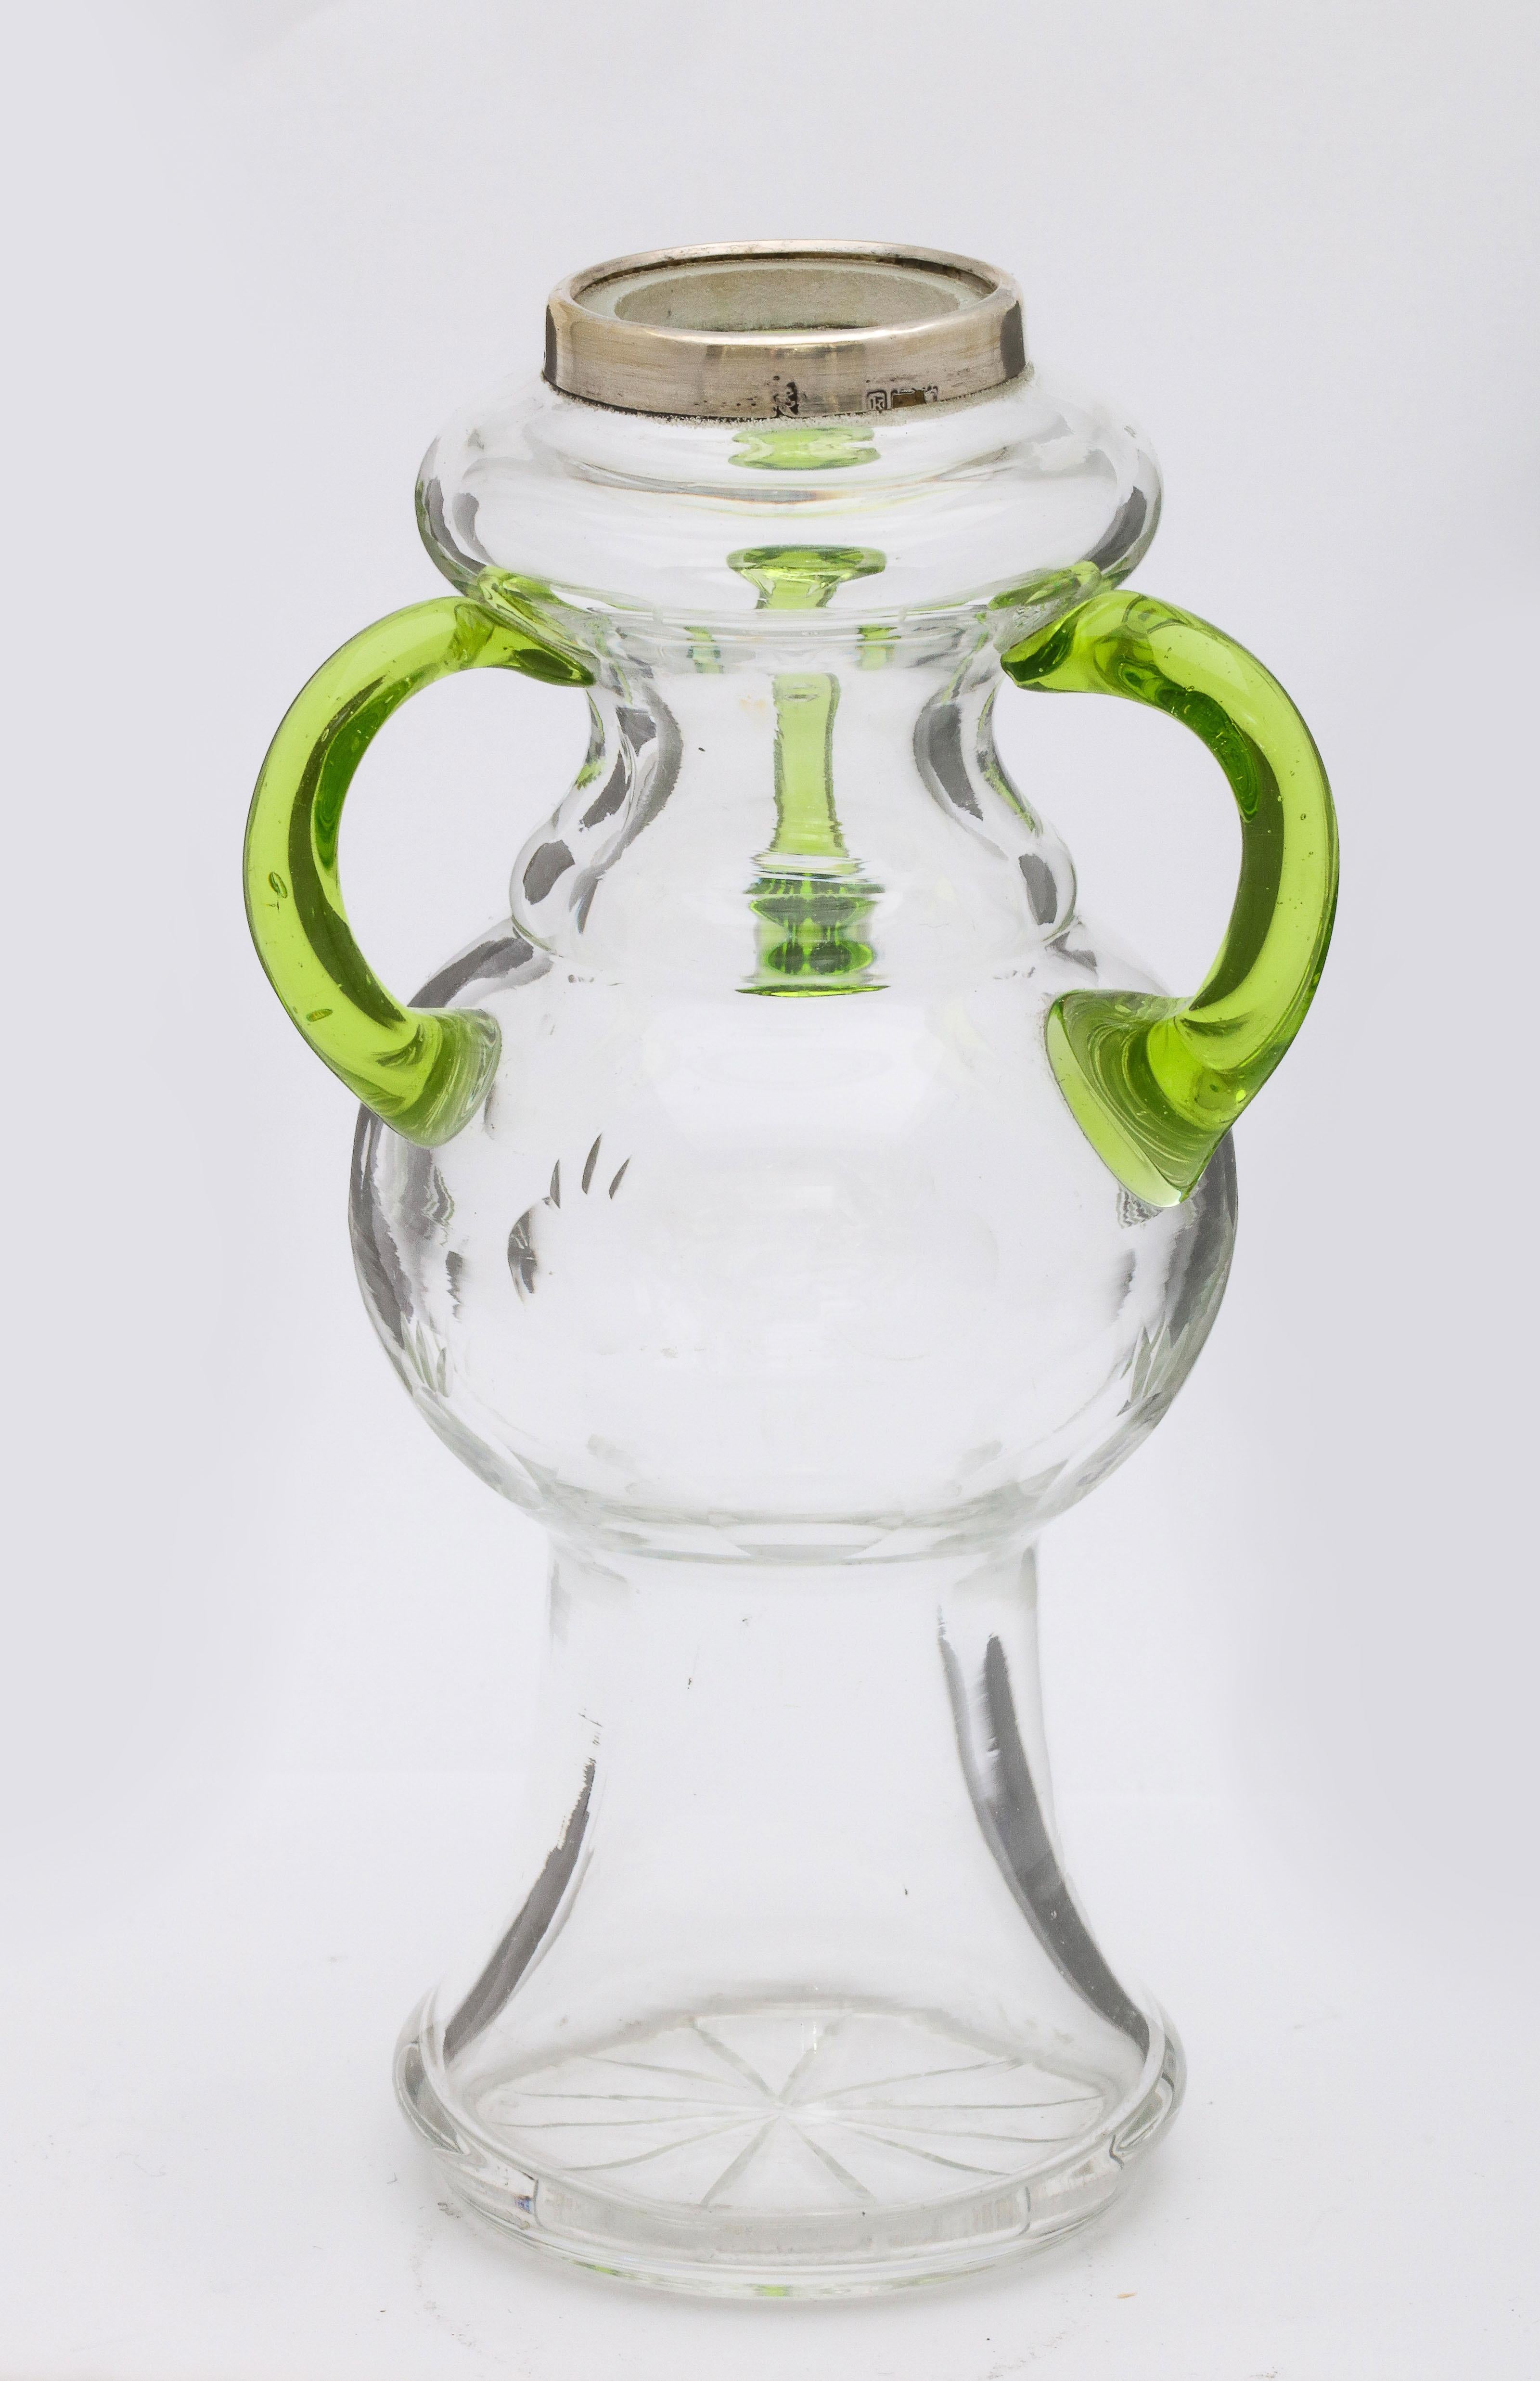 Unusual, Art Nouveau, sterling silver-mounted clear and lime green hand blown glass vase, having three lime green hand blown arms, London, 1905. Incised star on underside of base, small cut design on central part of vase (see photos). Measures: 6